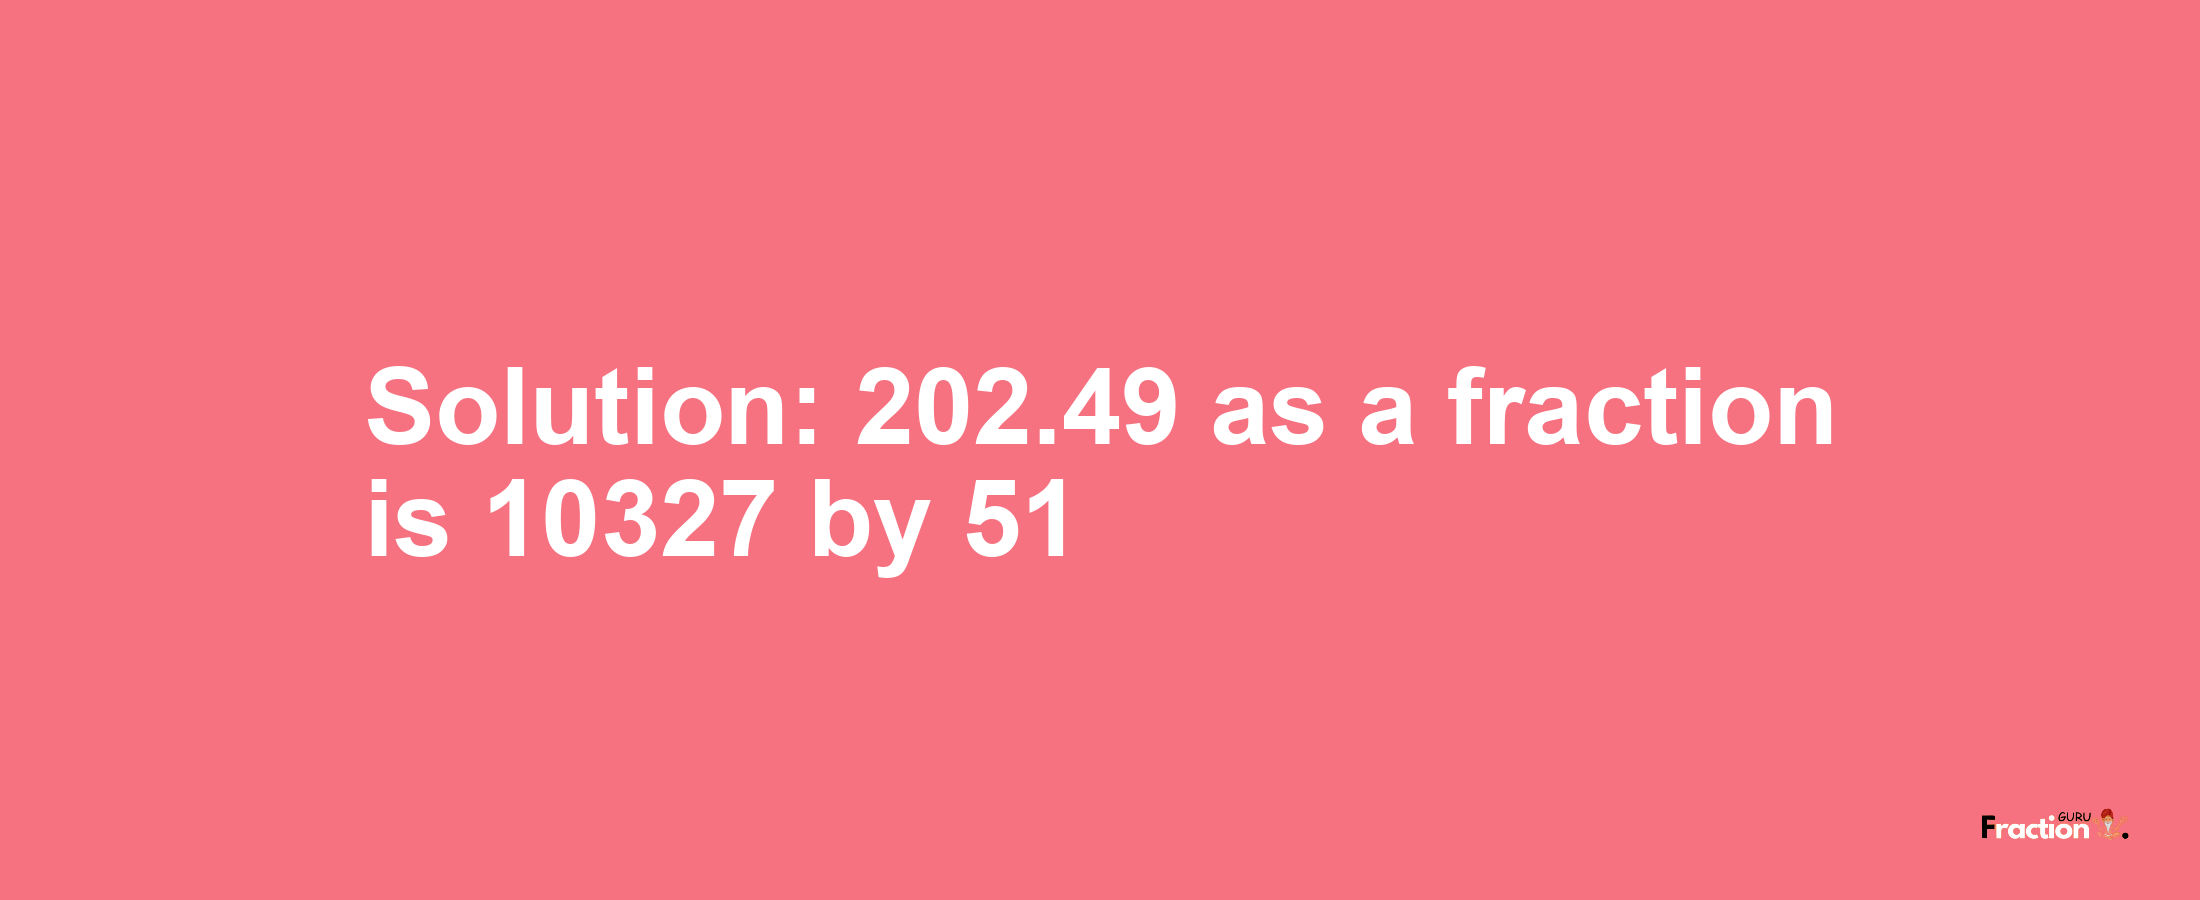 Solution:202.49 as a fraction is 10327/51